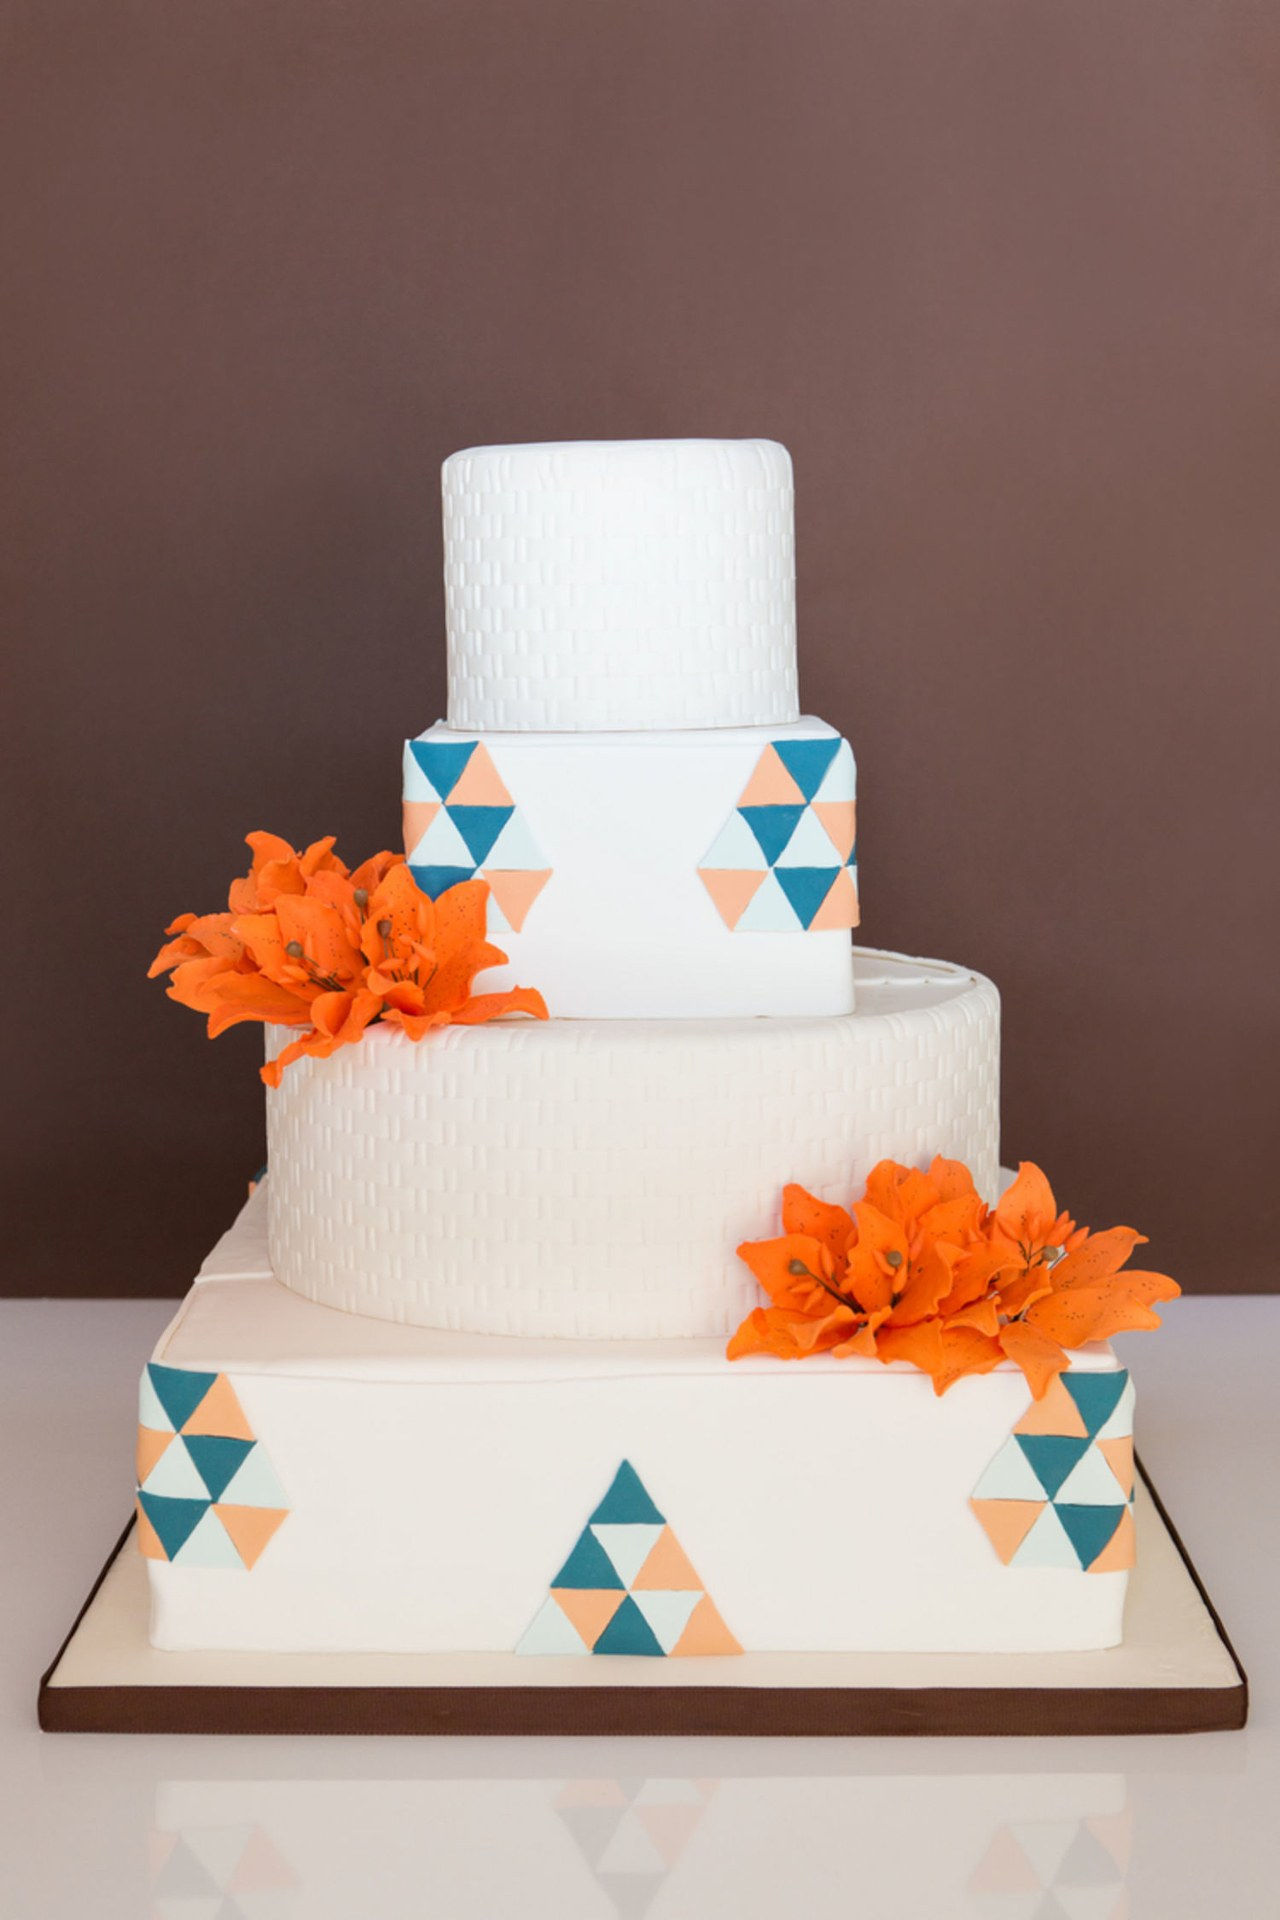 08 2016 wedding cake trends geometric cakes made in heaven